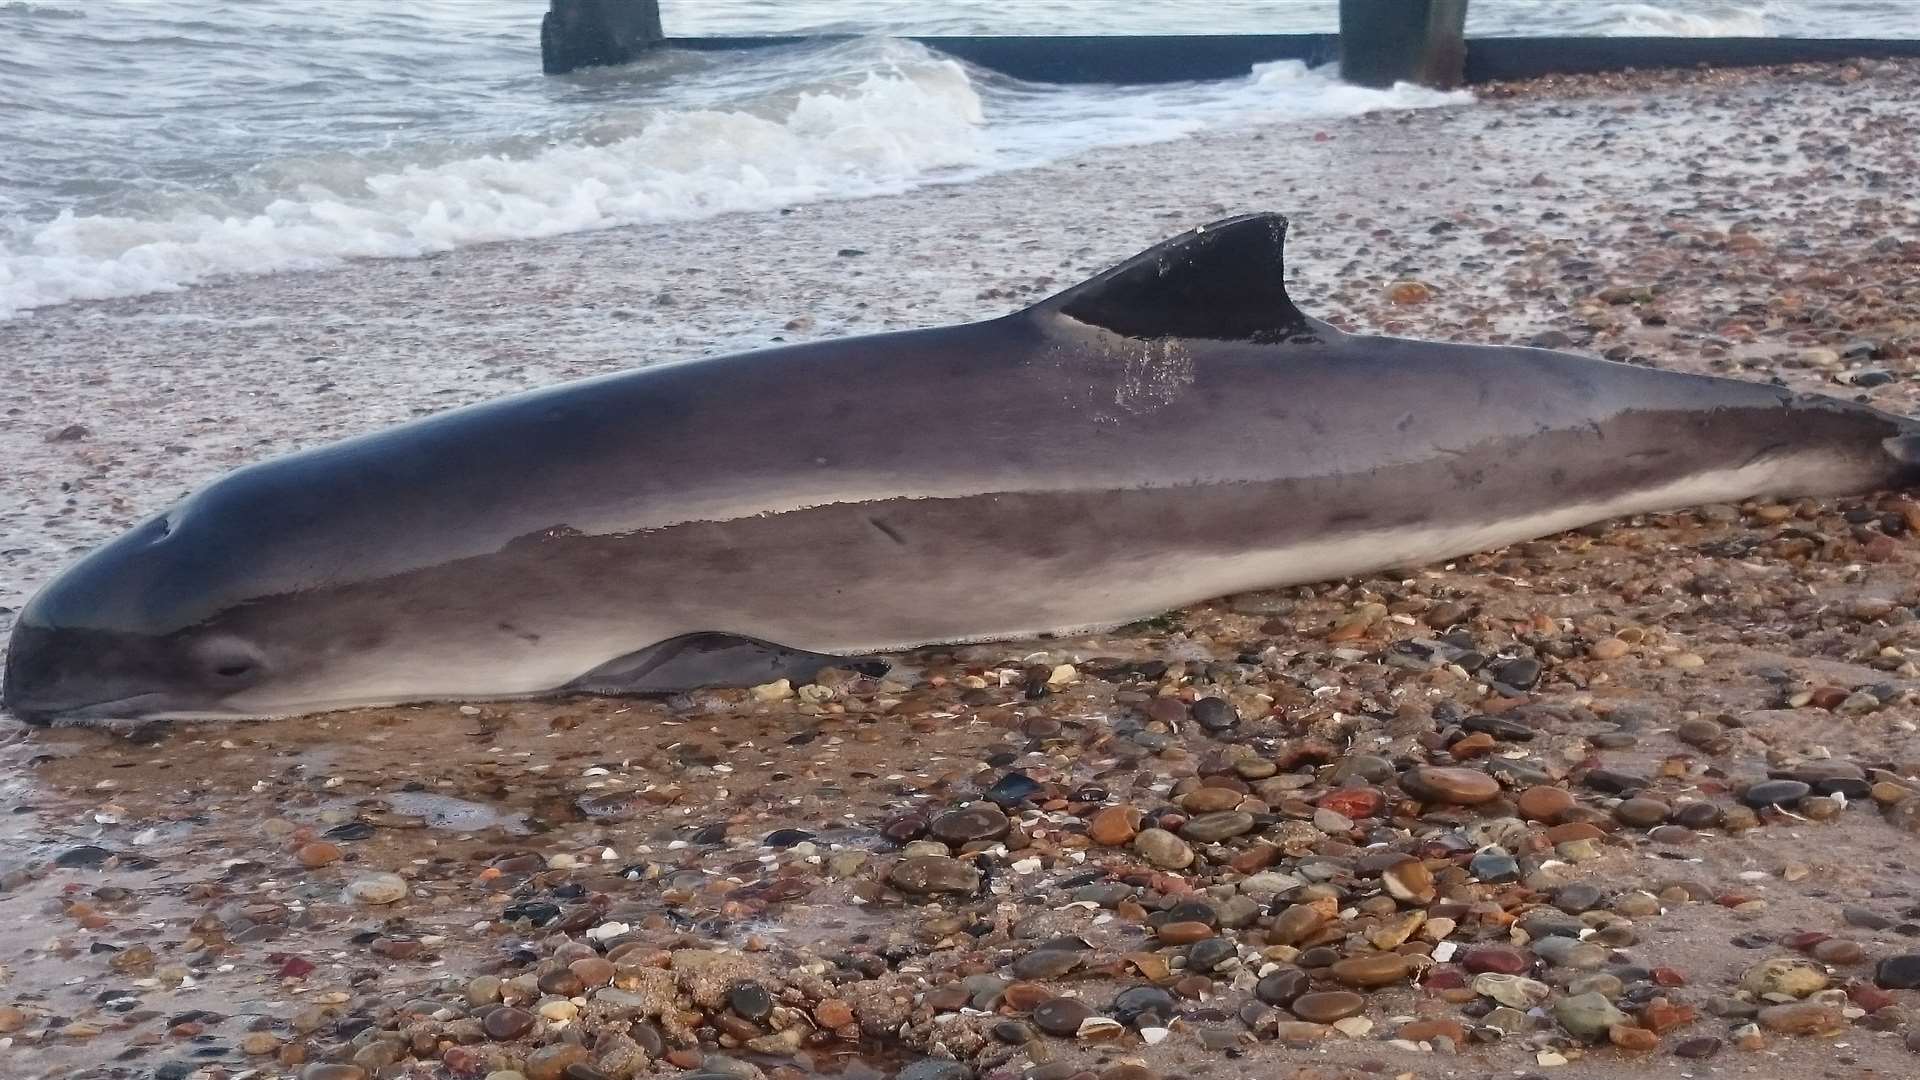 Four locals tried to save the porpoise before reporting it to the British Divers Marine Life Rescue